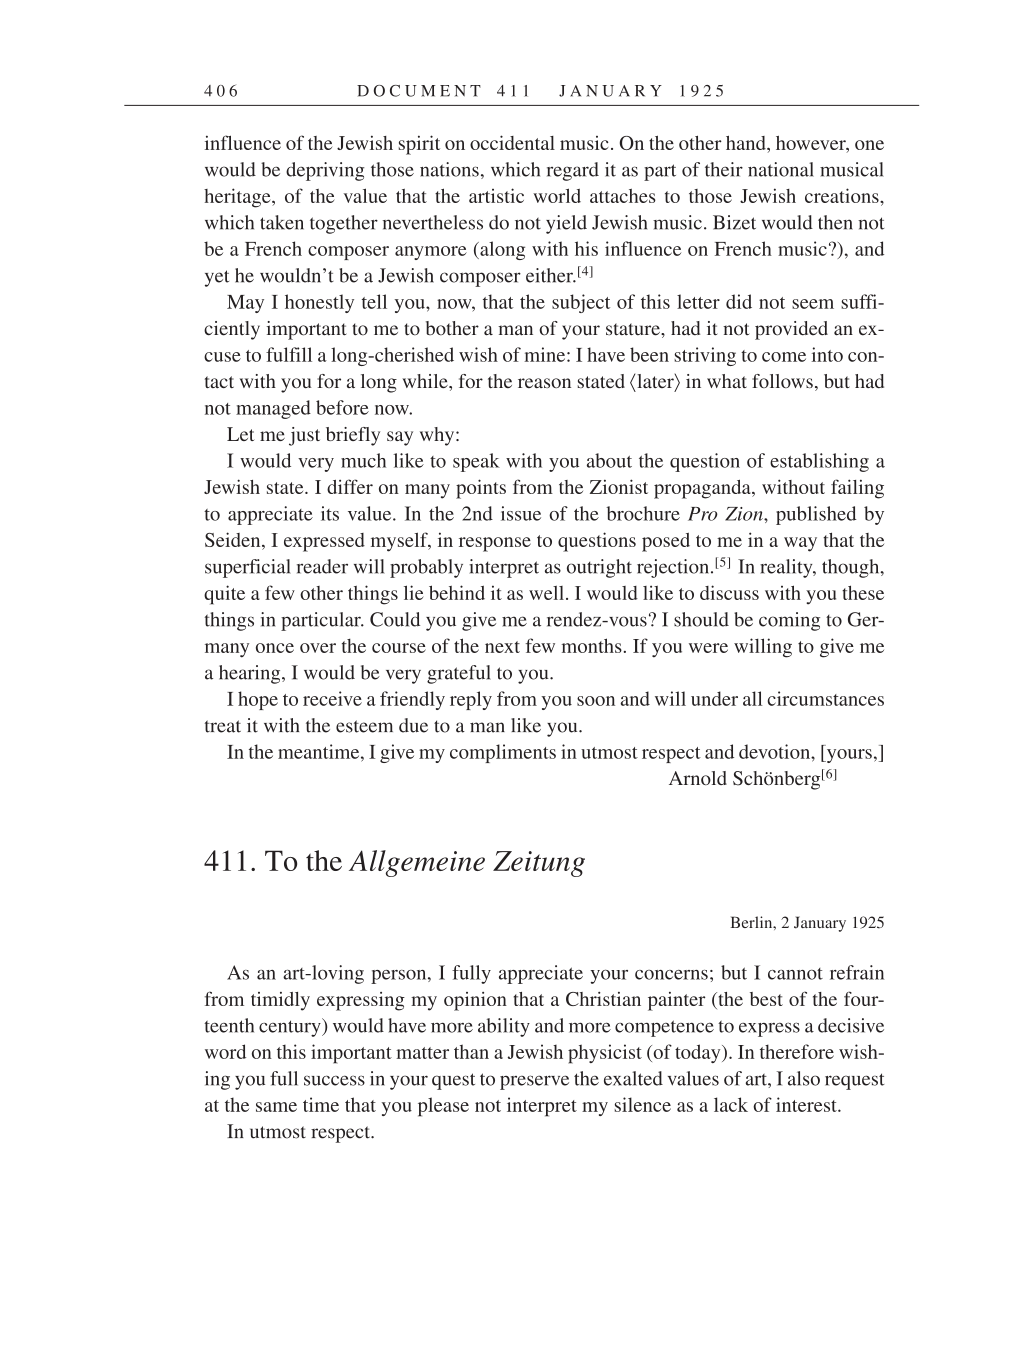 Volume 14: The Berlin Years: Writings & Correspondence, April 1923-May 1925 (English Translation Supplement) page 406